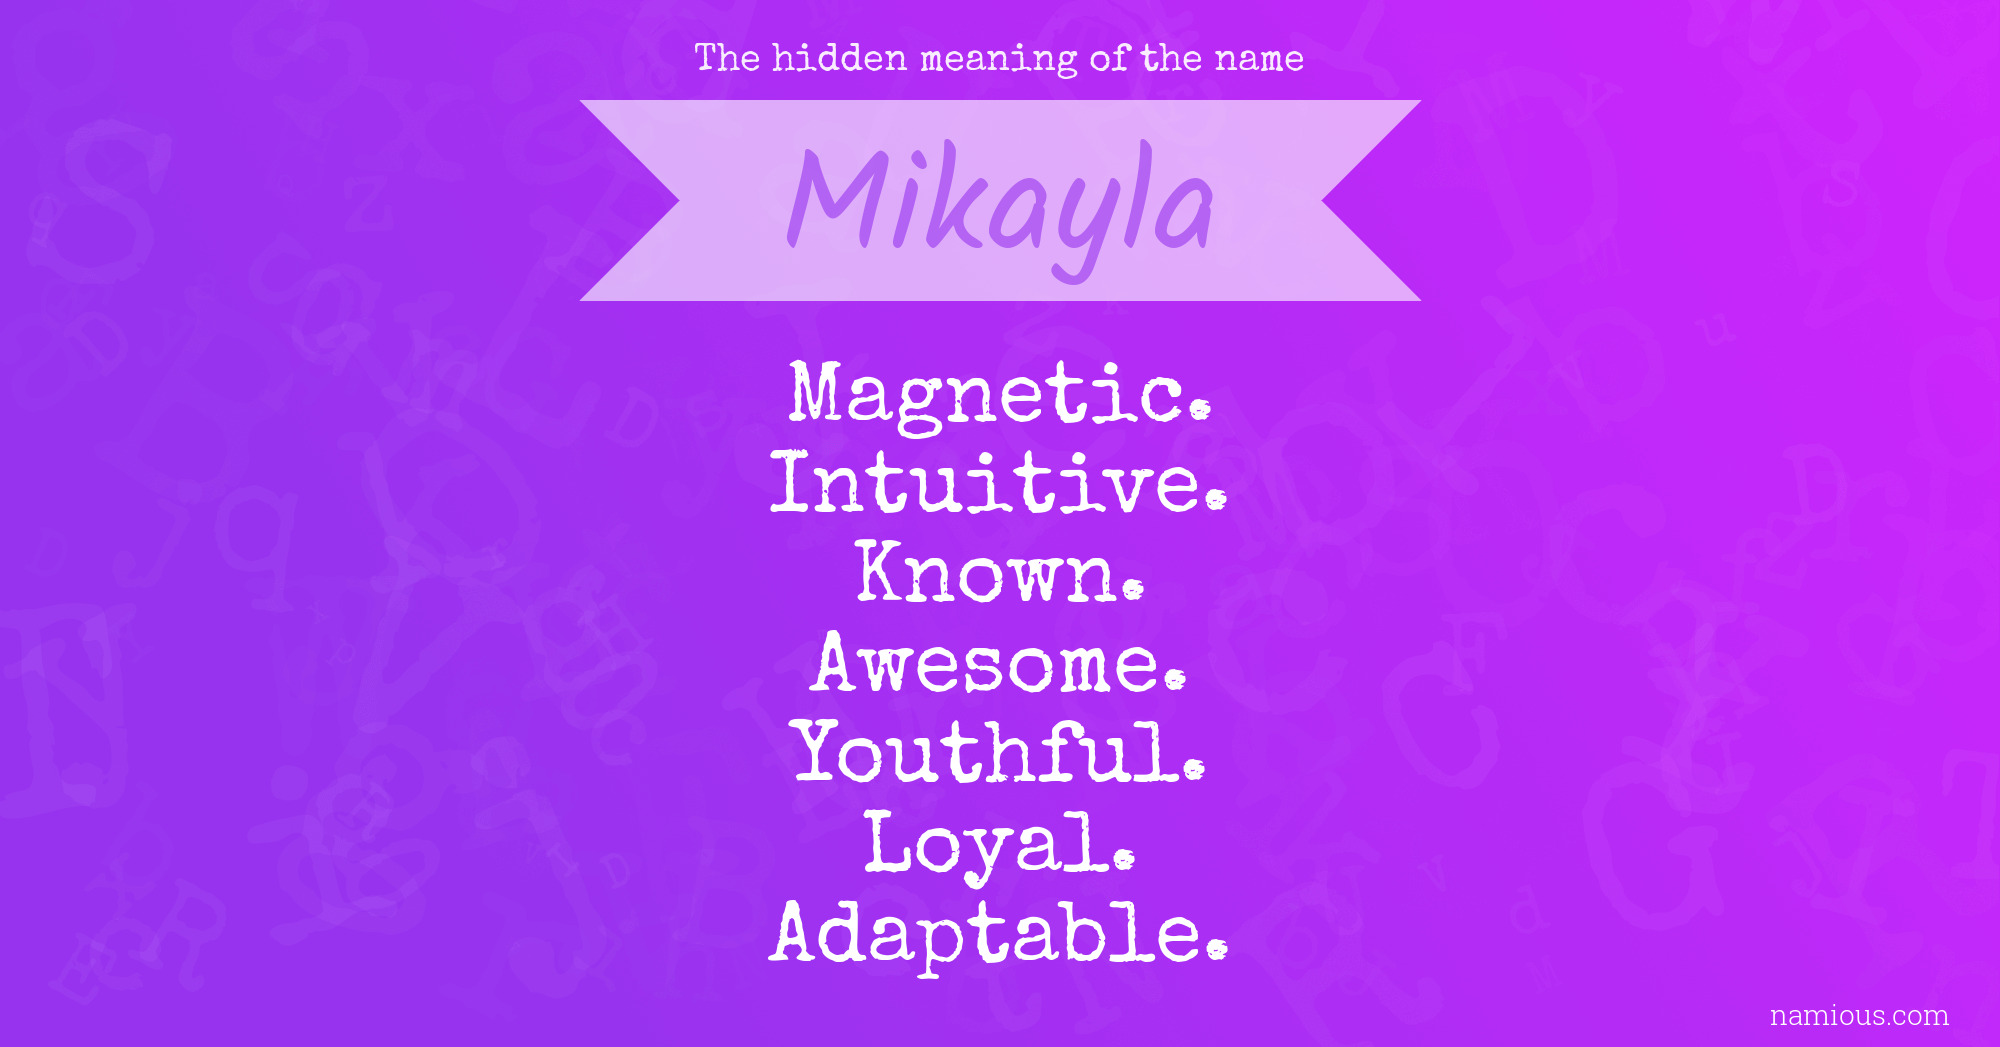 The hidden meaning of the name Mikayla